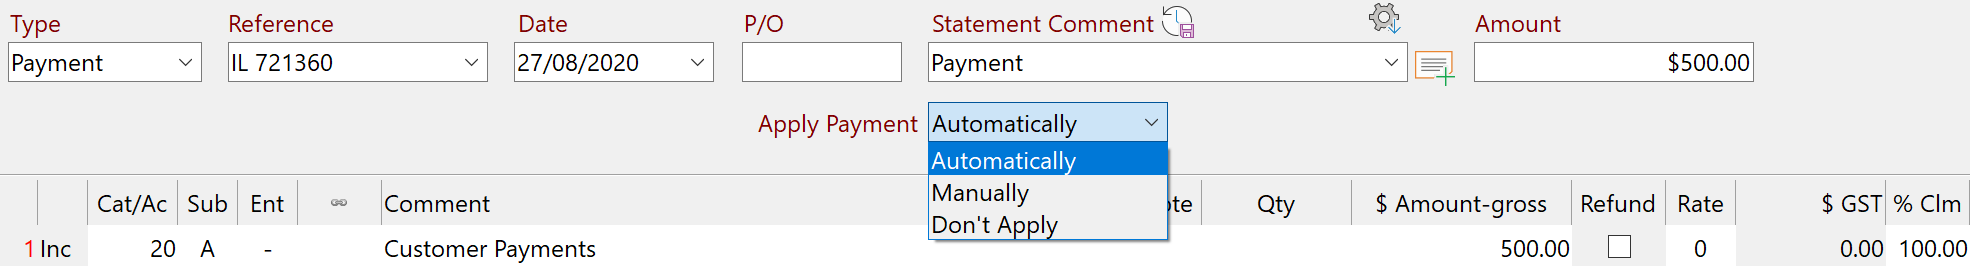 Fin_Apply_Payment_Options_v10